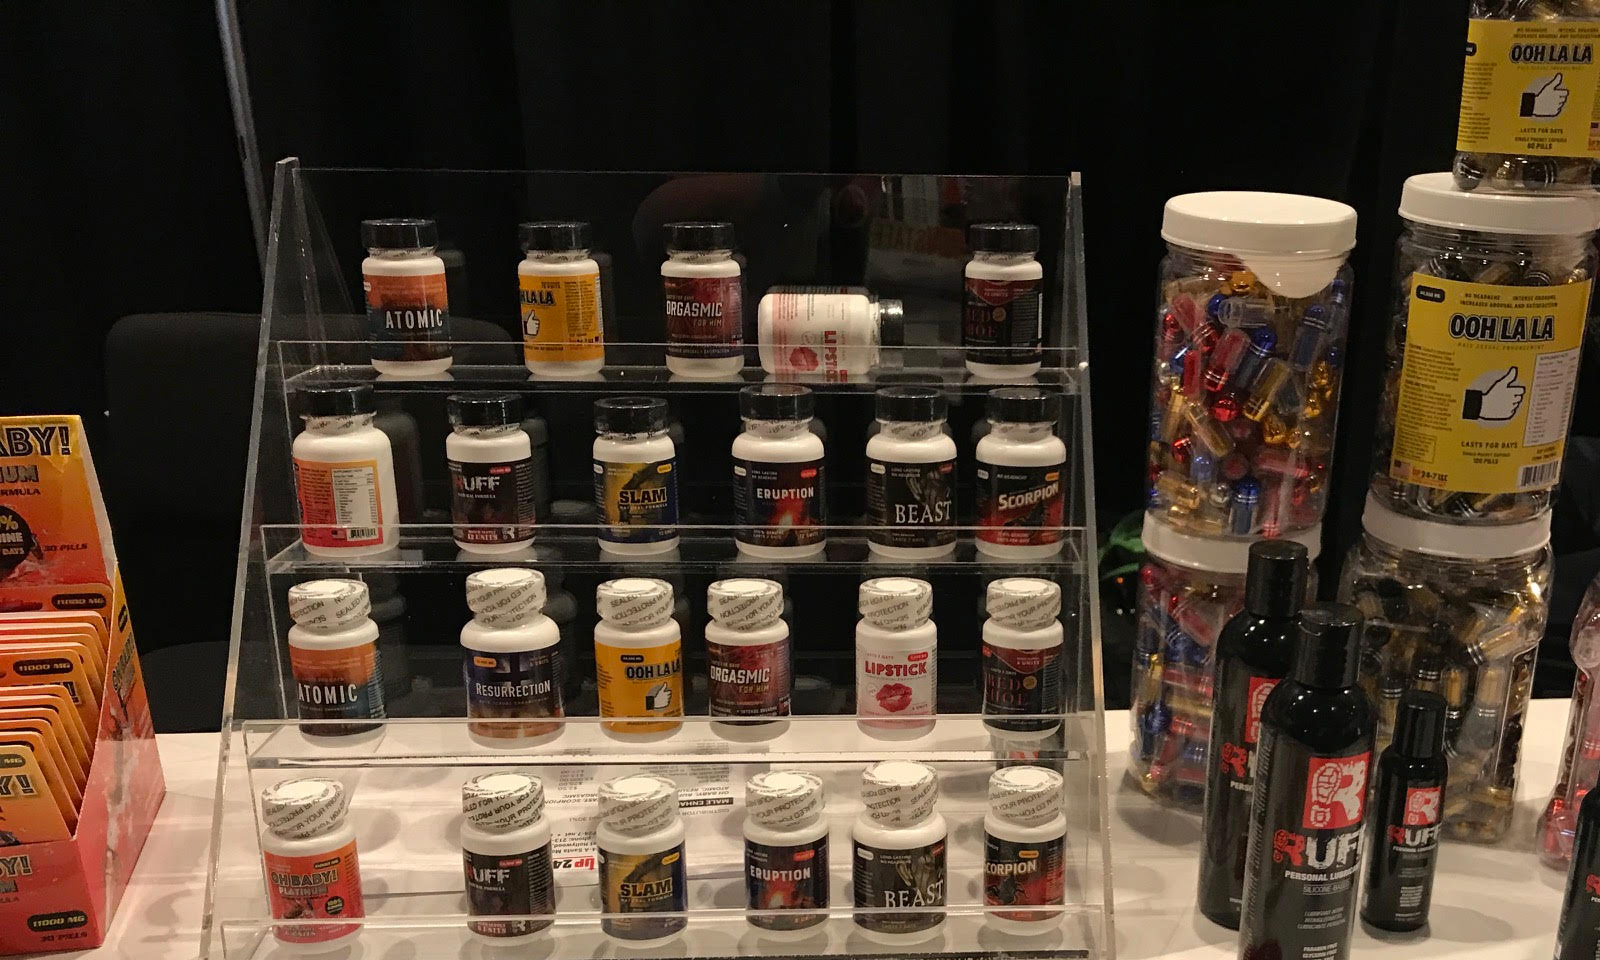 Up 24-7 Brings Enhancements, Supplements to AVN Novelty Expo